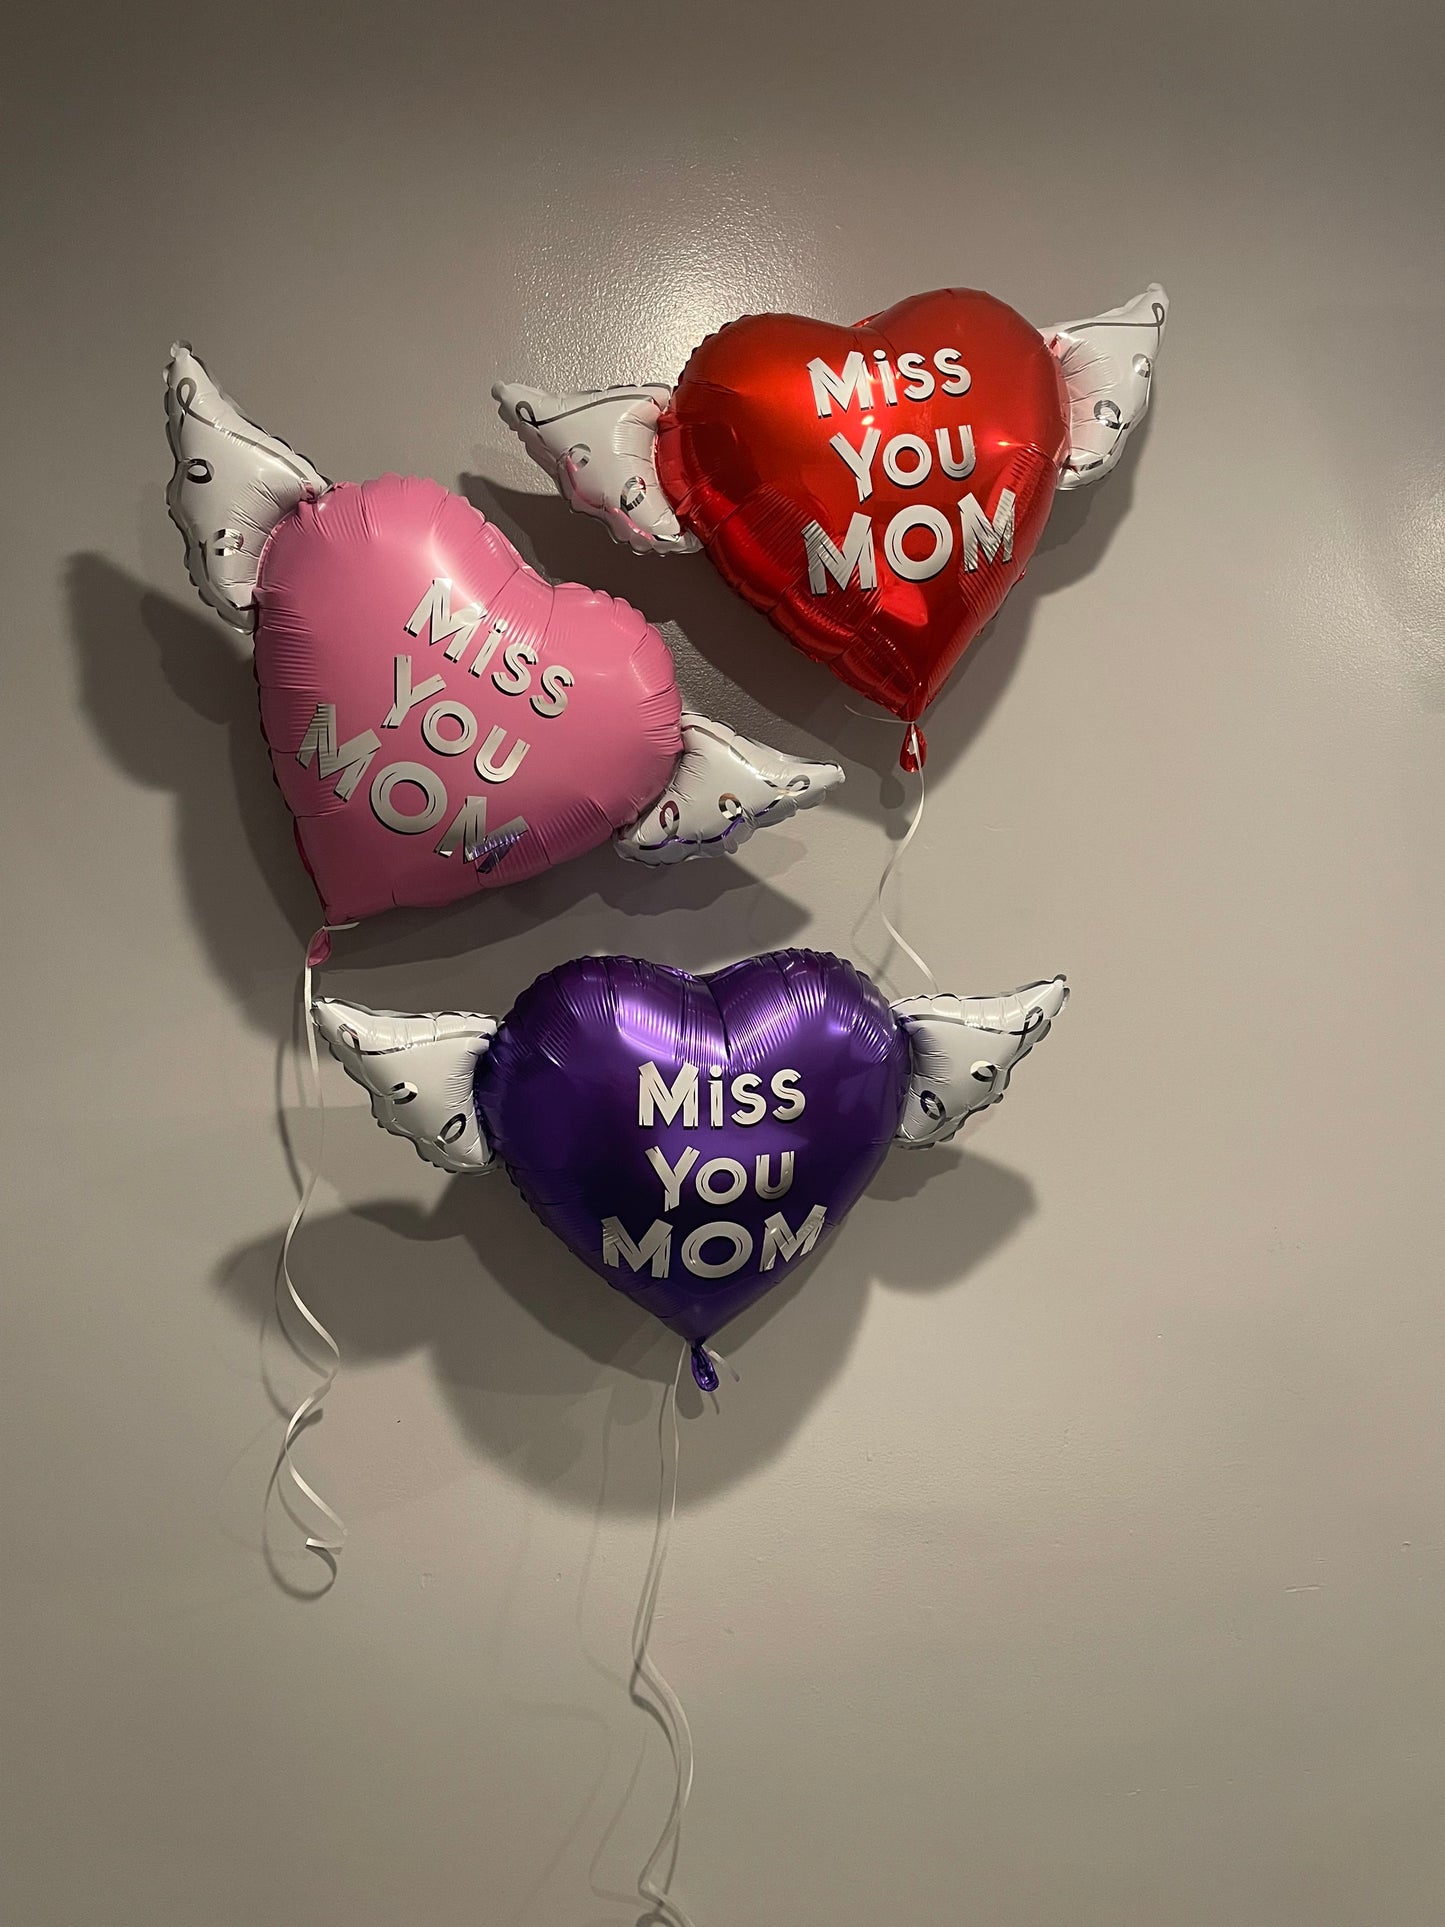 Miss You Mom Heavenly Balloons ™ Heart Shaped with angel wings (Red, Pink & Purple)